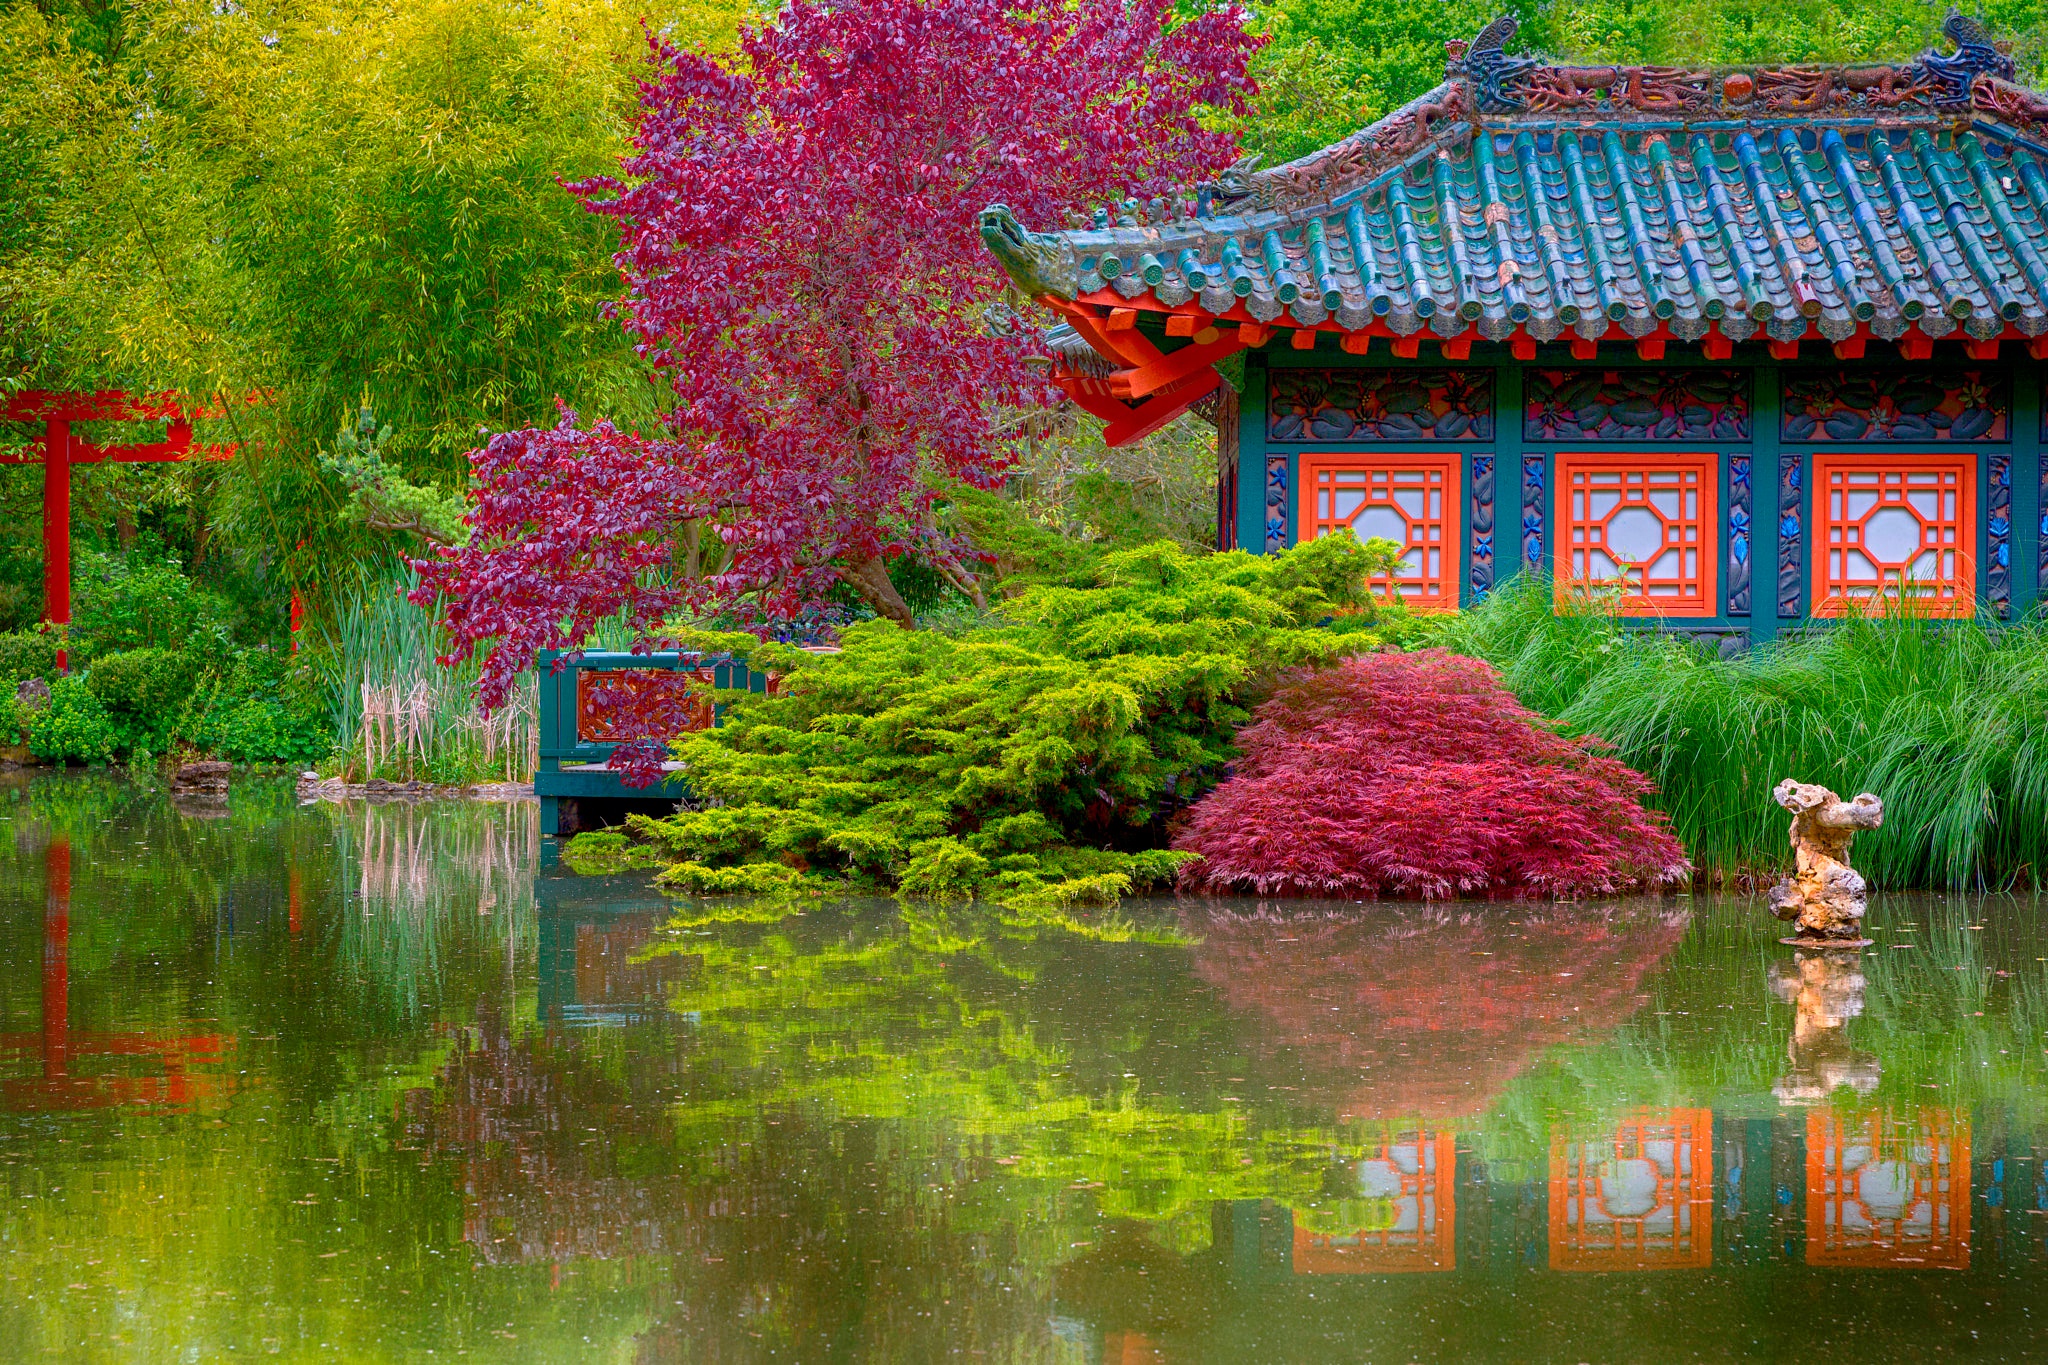 man made, japanese garden, colorful, lodge, pond, tree wallpaper for mobile